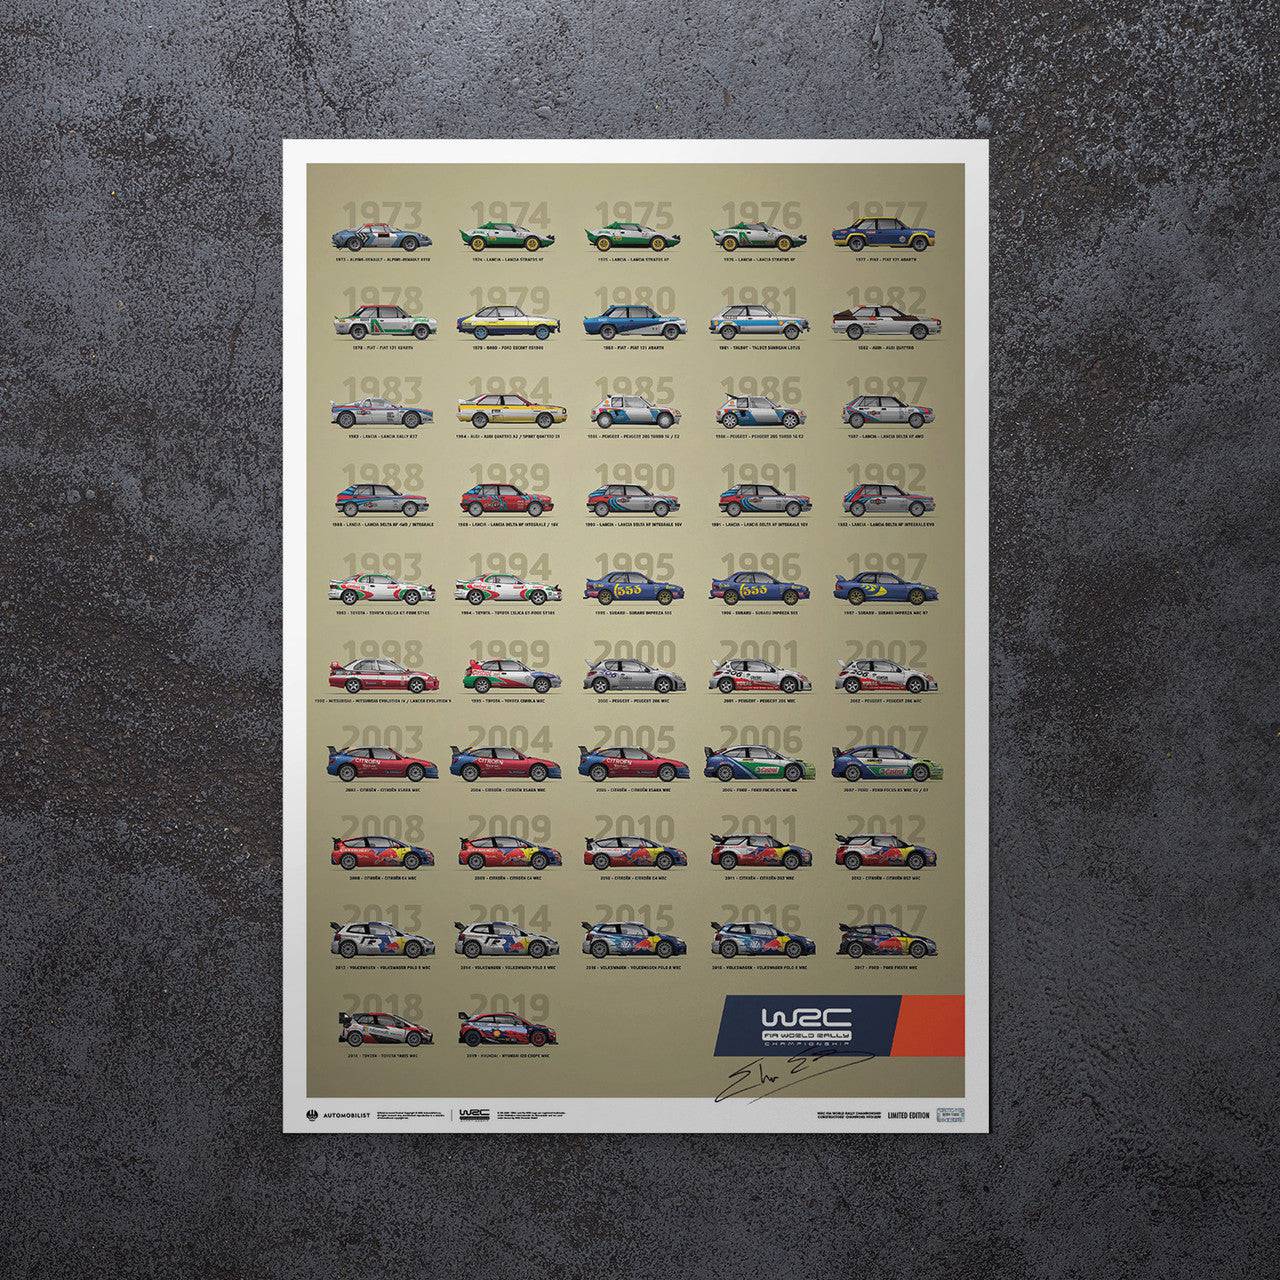 WRC Constructors’ Champions 1973-2019 - 47th Anniversary | Limited Edition